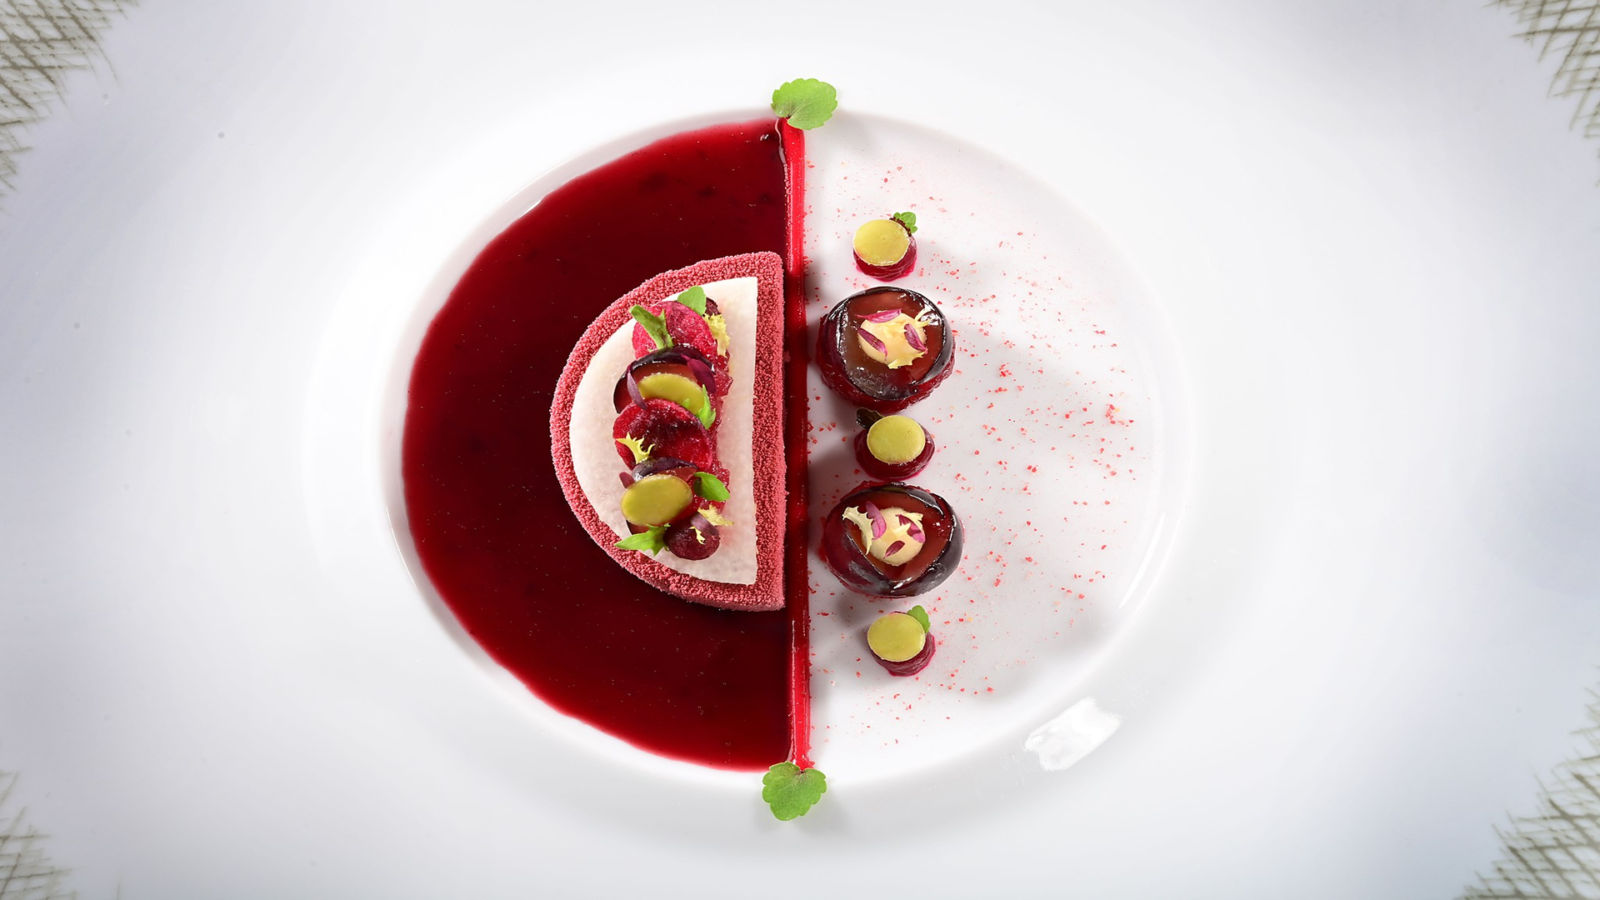 Treat for travellers: 10 Michelin three-star restaurants to add to your bucket list